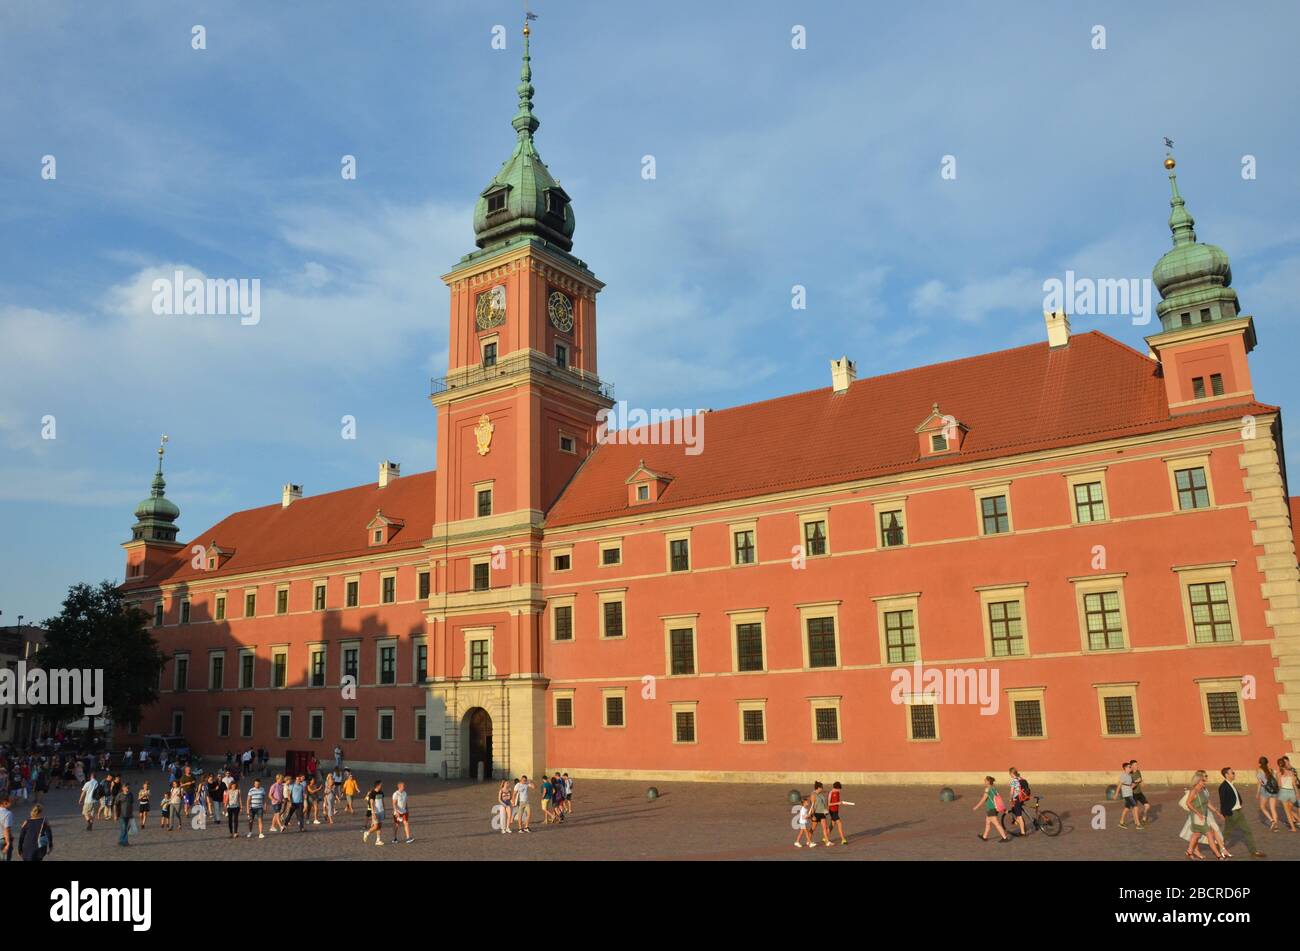 The Royal Castle, Castle Square, Old Town, August, Warsaw, Poland, 2019 Stock Photo